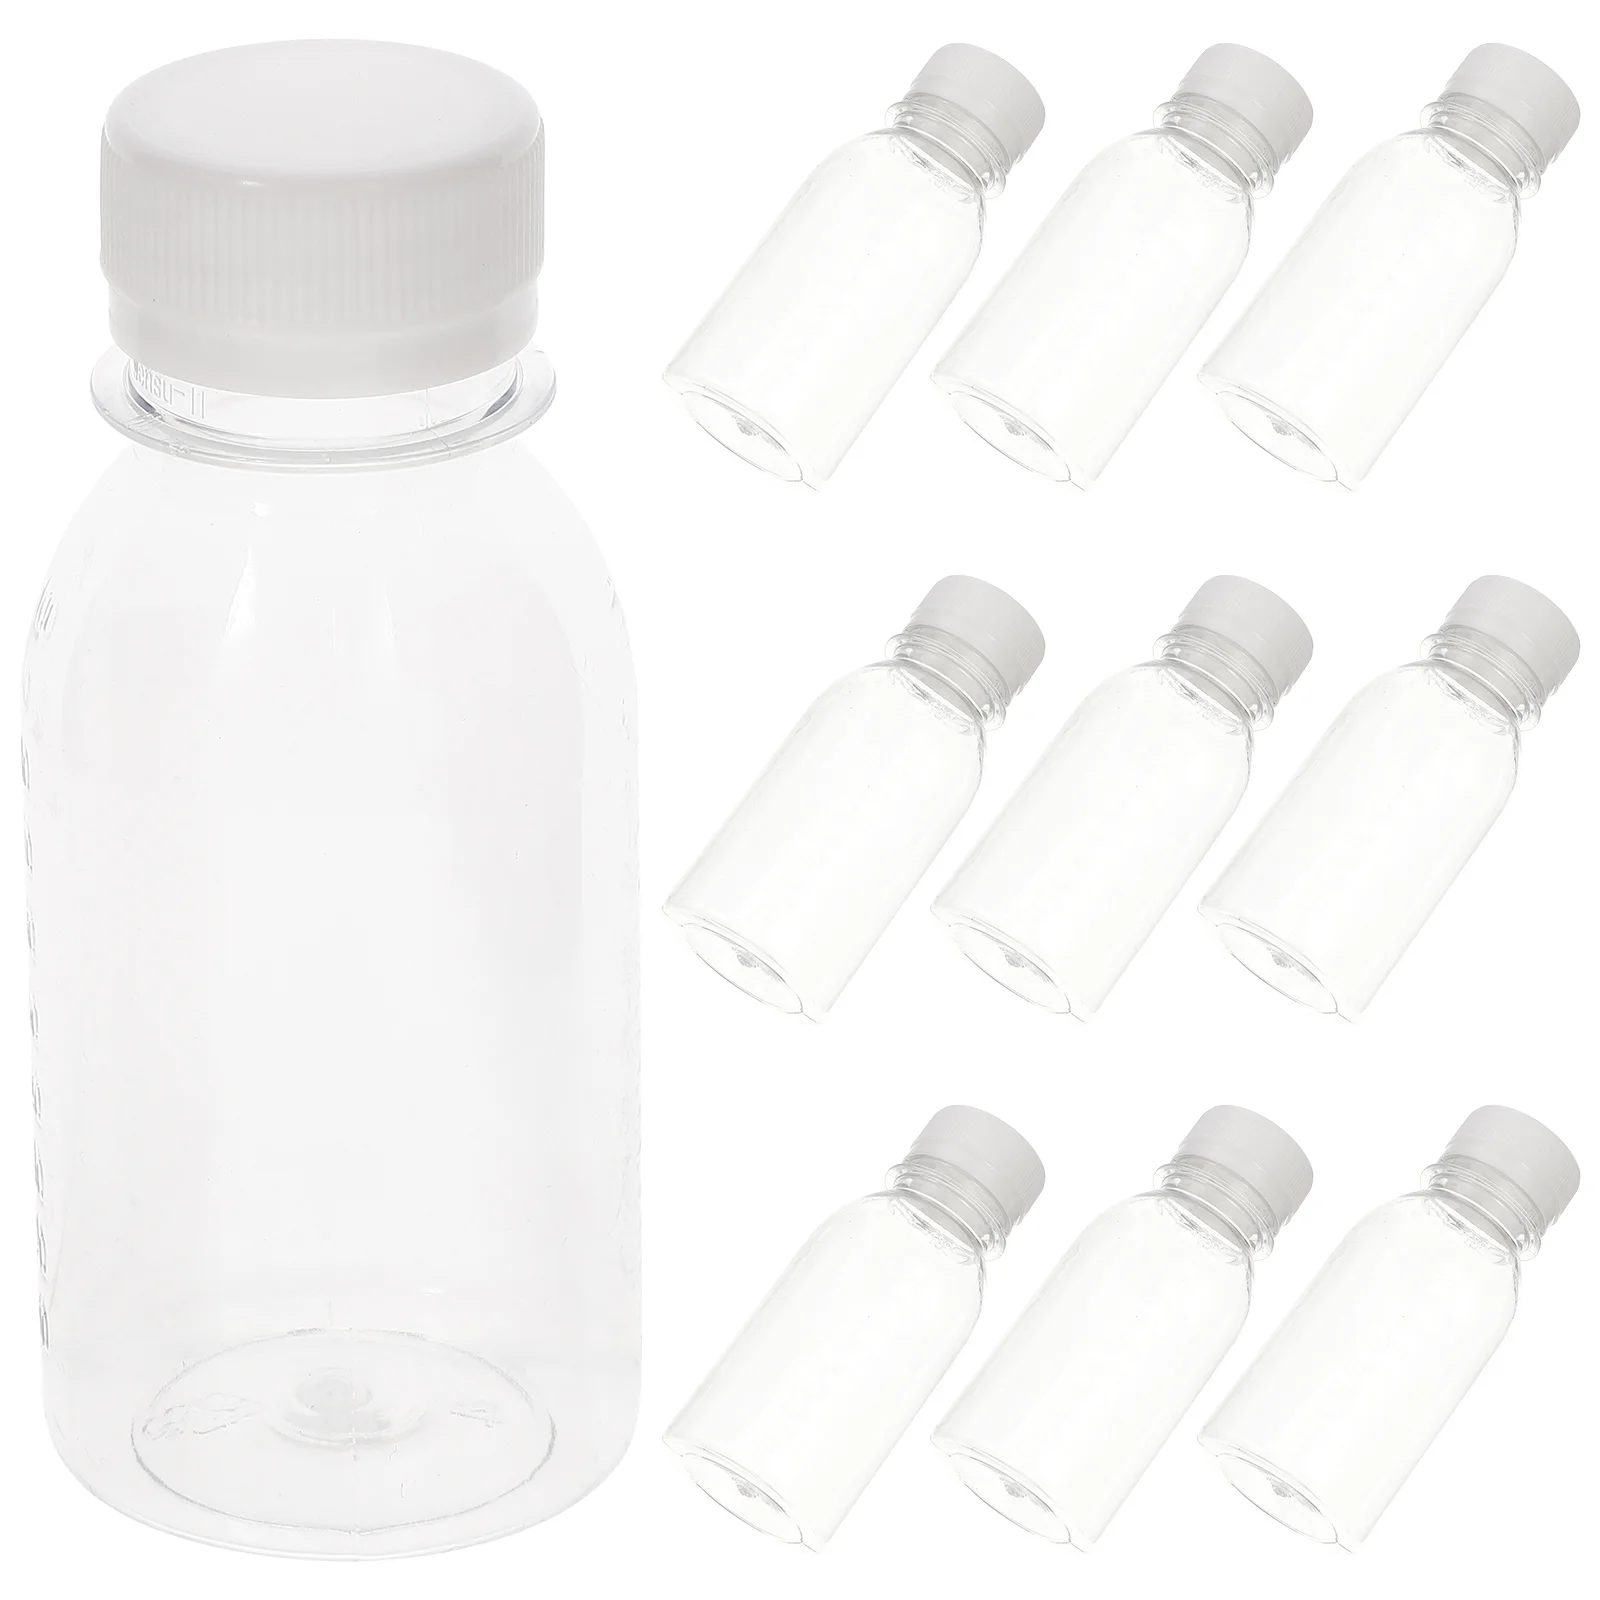 https://ae01.alicdn.com/kf/S5c412bc8c2d34d31b90ca52e9d7709bcS/10-Pcs-Sealable-Containers-Sample-Bottles-Iced-Tea-Clear-Lid-Beverage-Caps-Ginger-Shot-Transparent-Milk.jpg